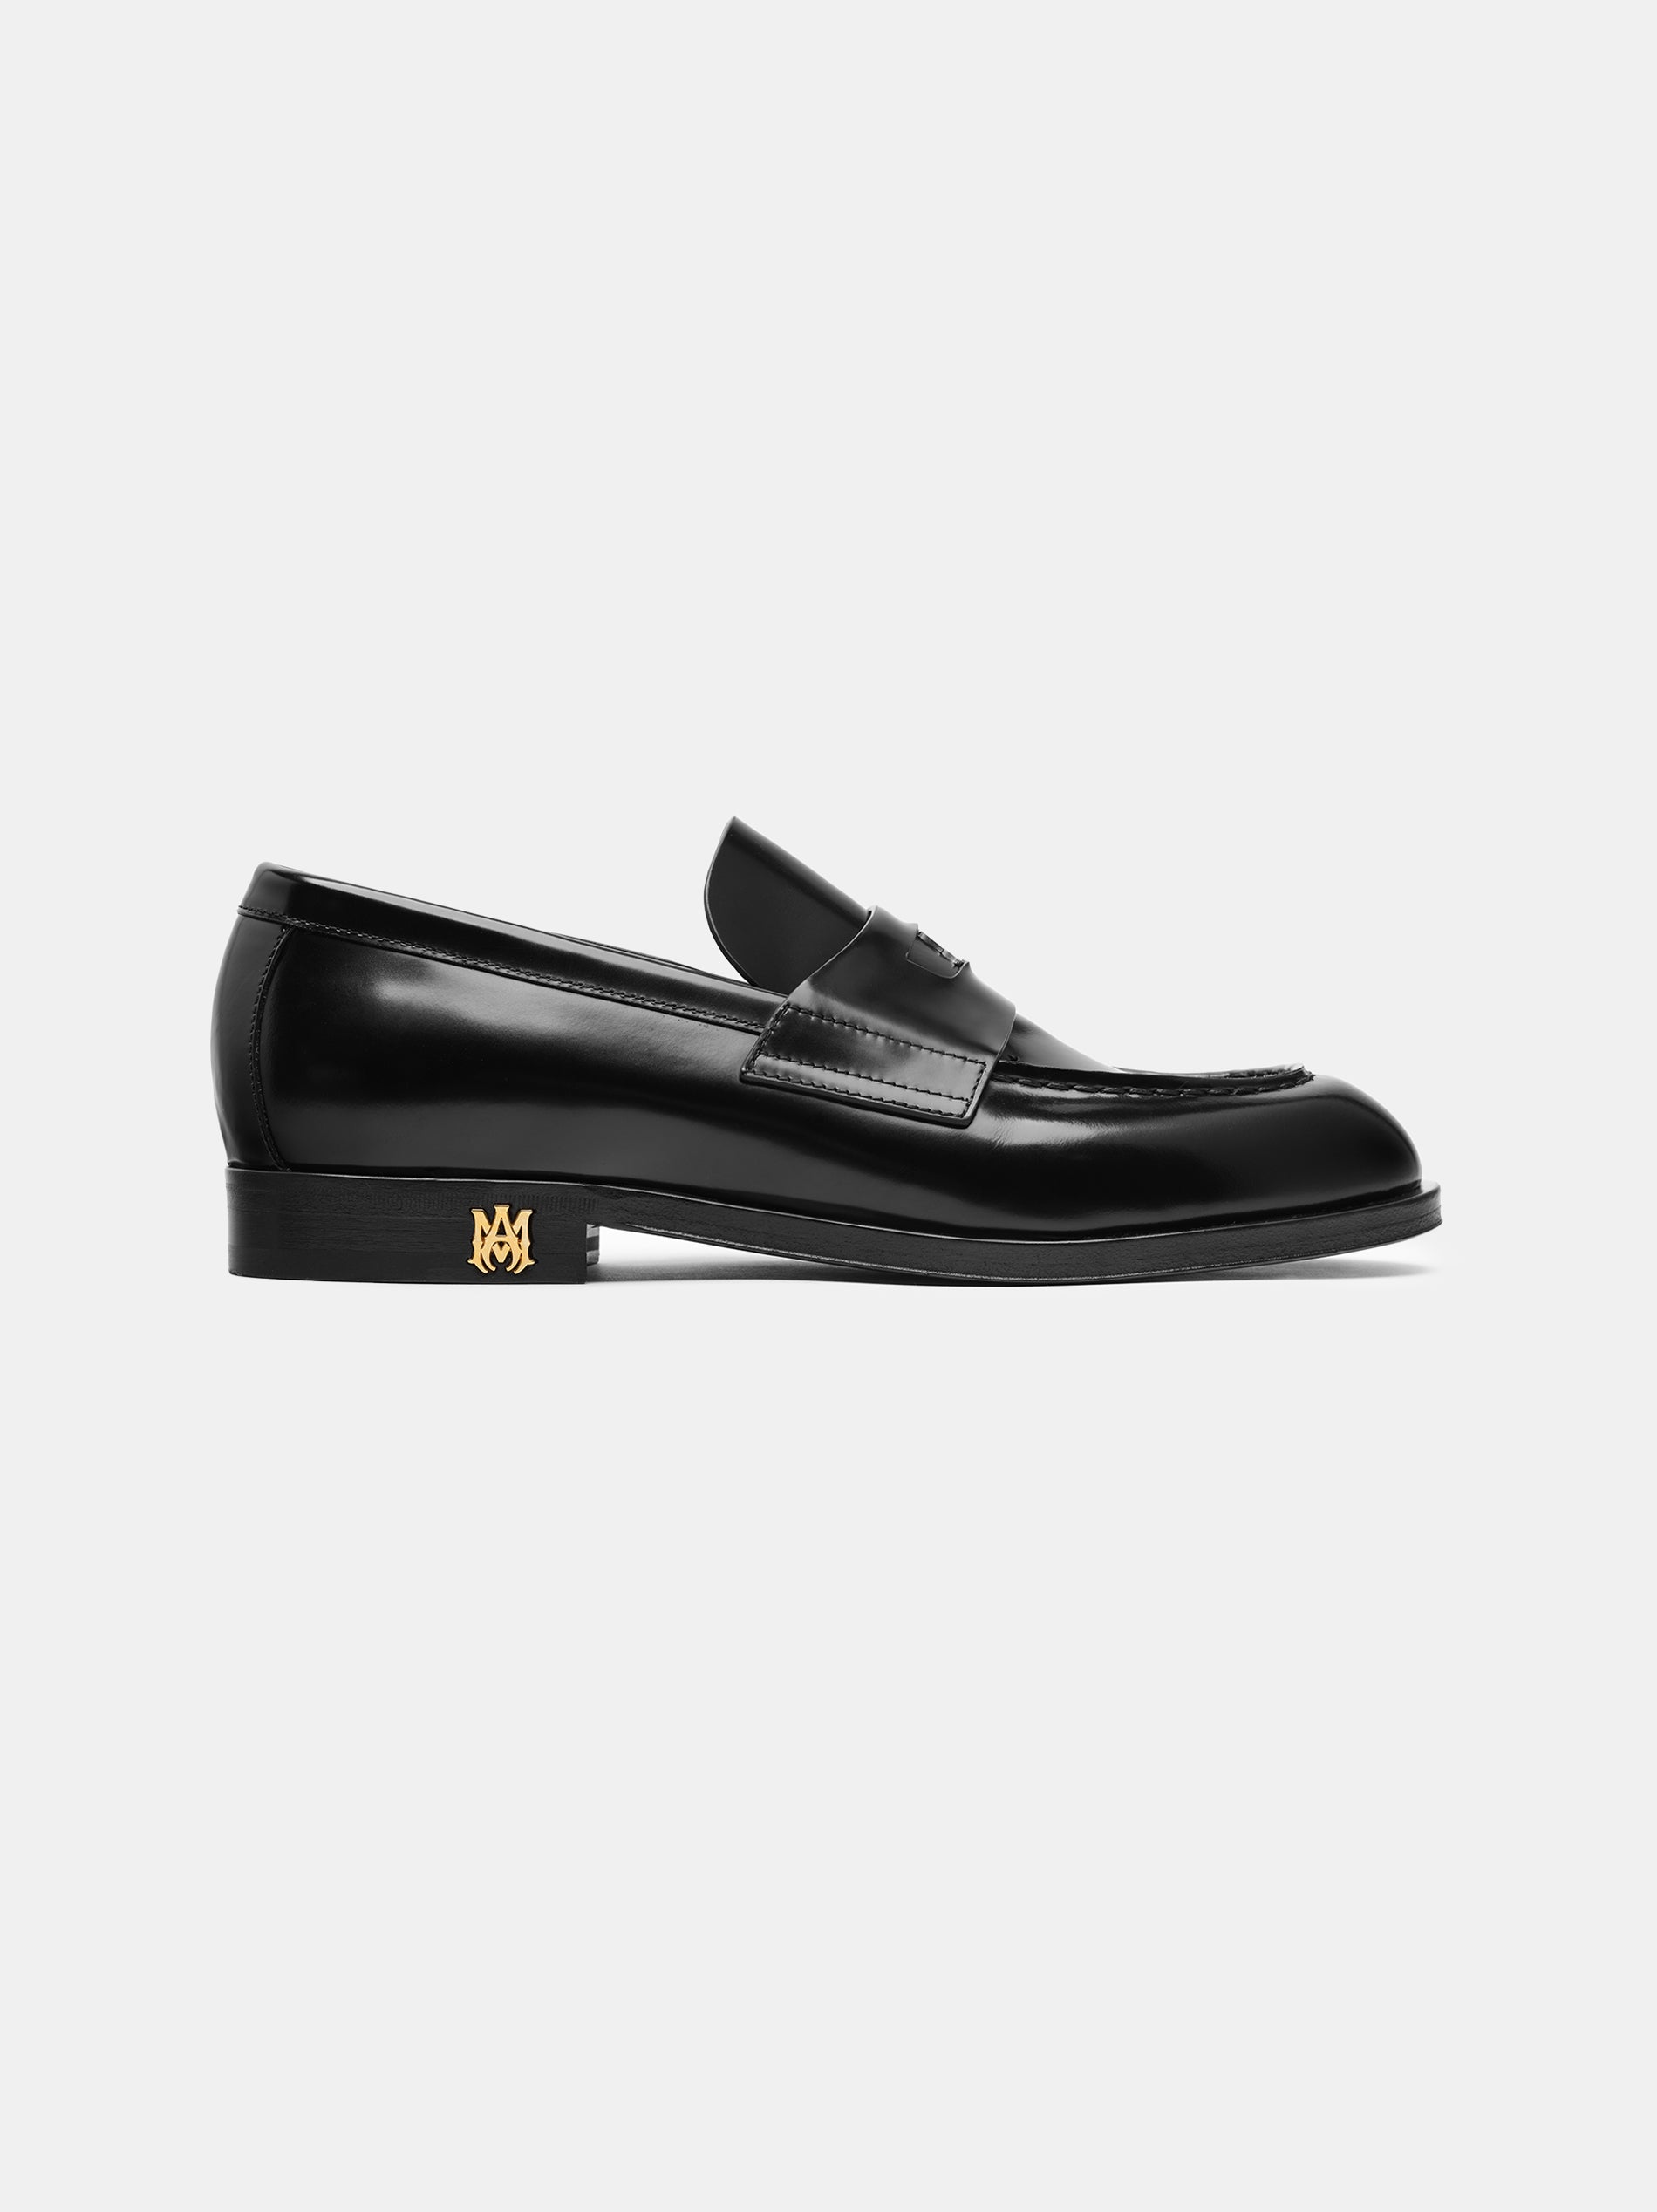 Product MA LOAFER - Black featured image